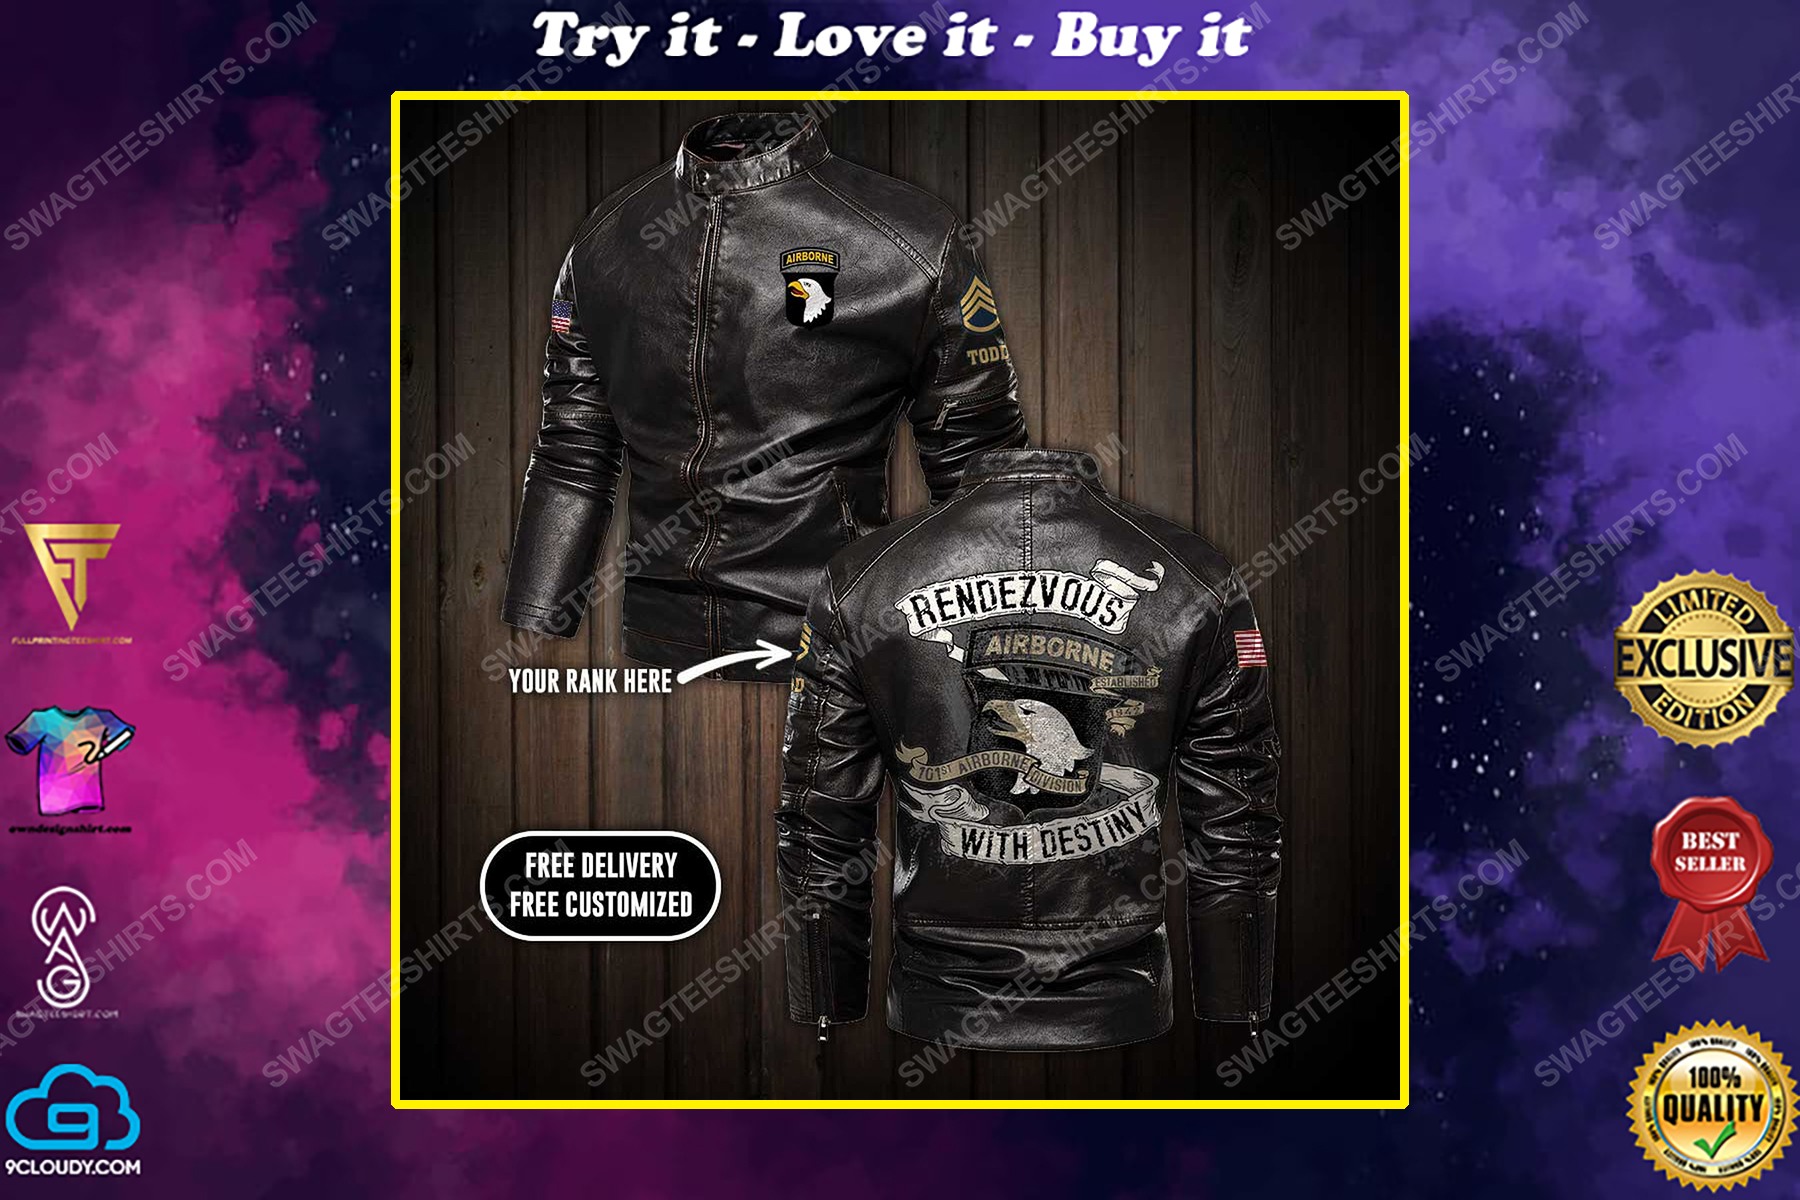 Custom airborne division rendezvous with destiny moto leather jacket